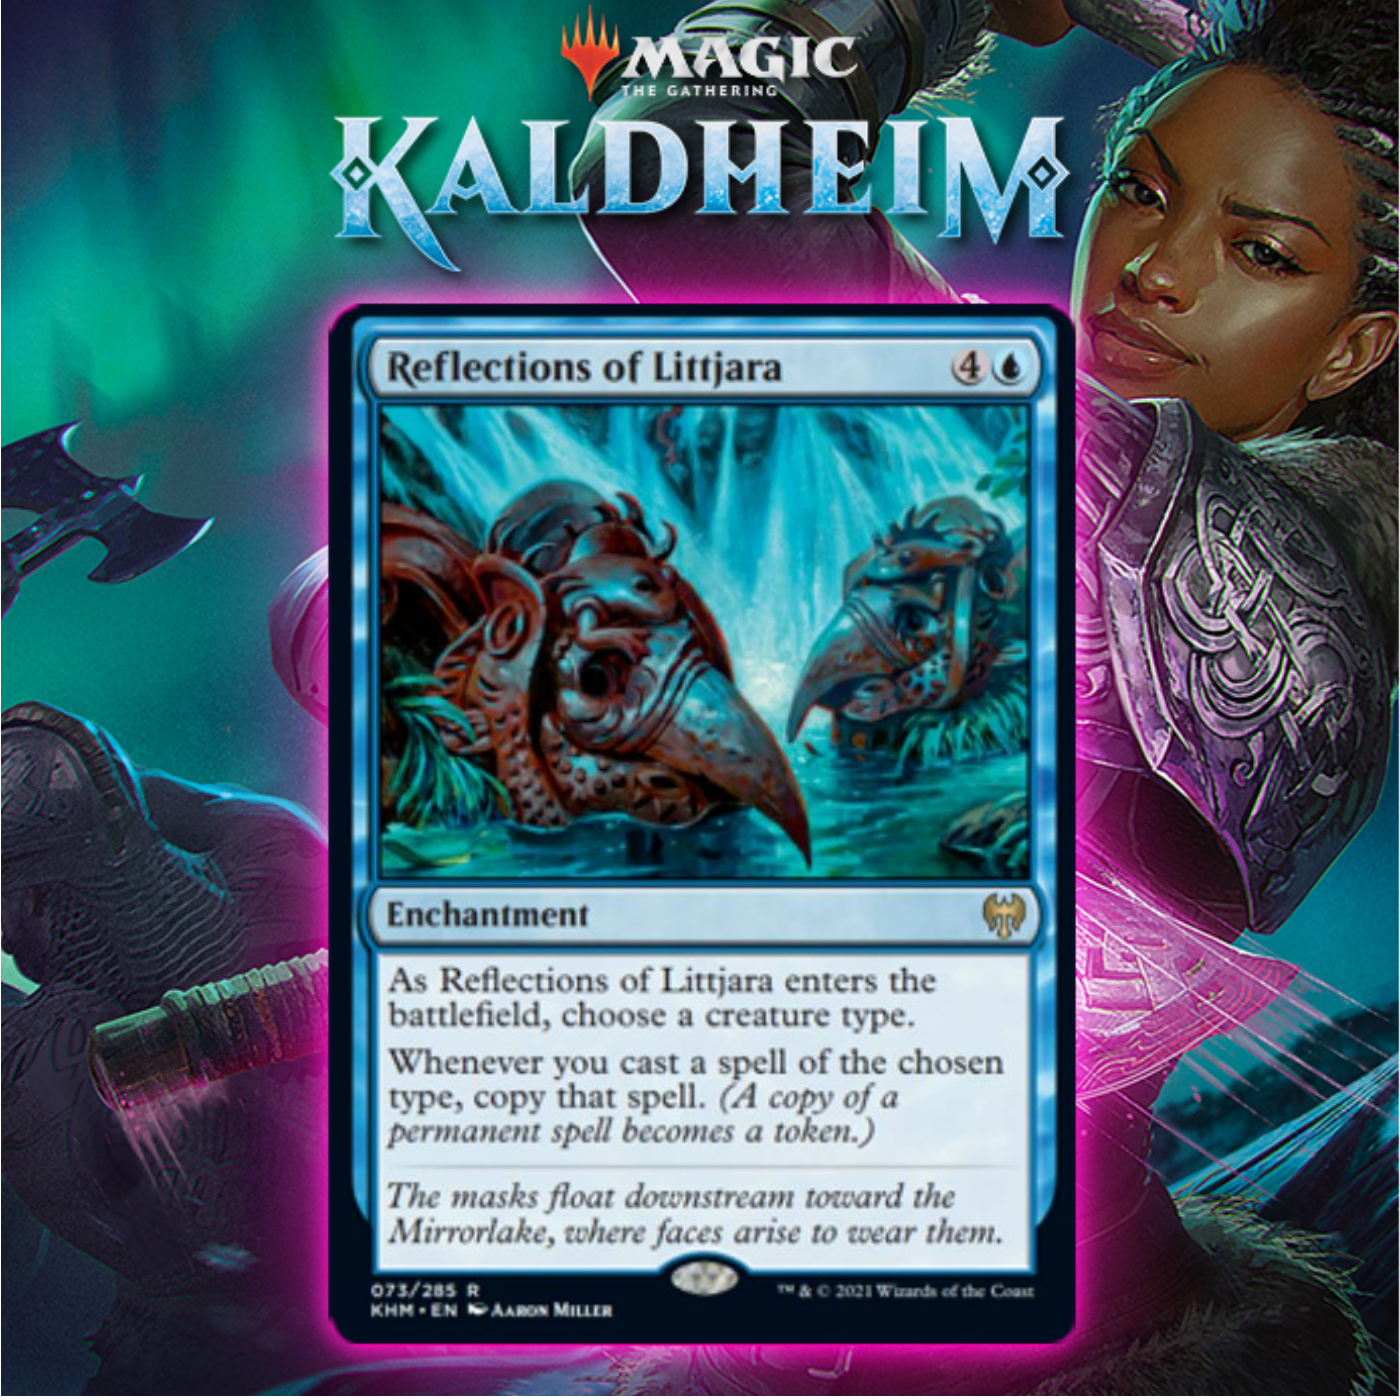 Blue Gets Unique Tribal Copying Enchantment In Reflection of Littjaya In Kaldheim